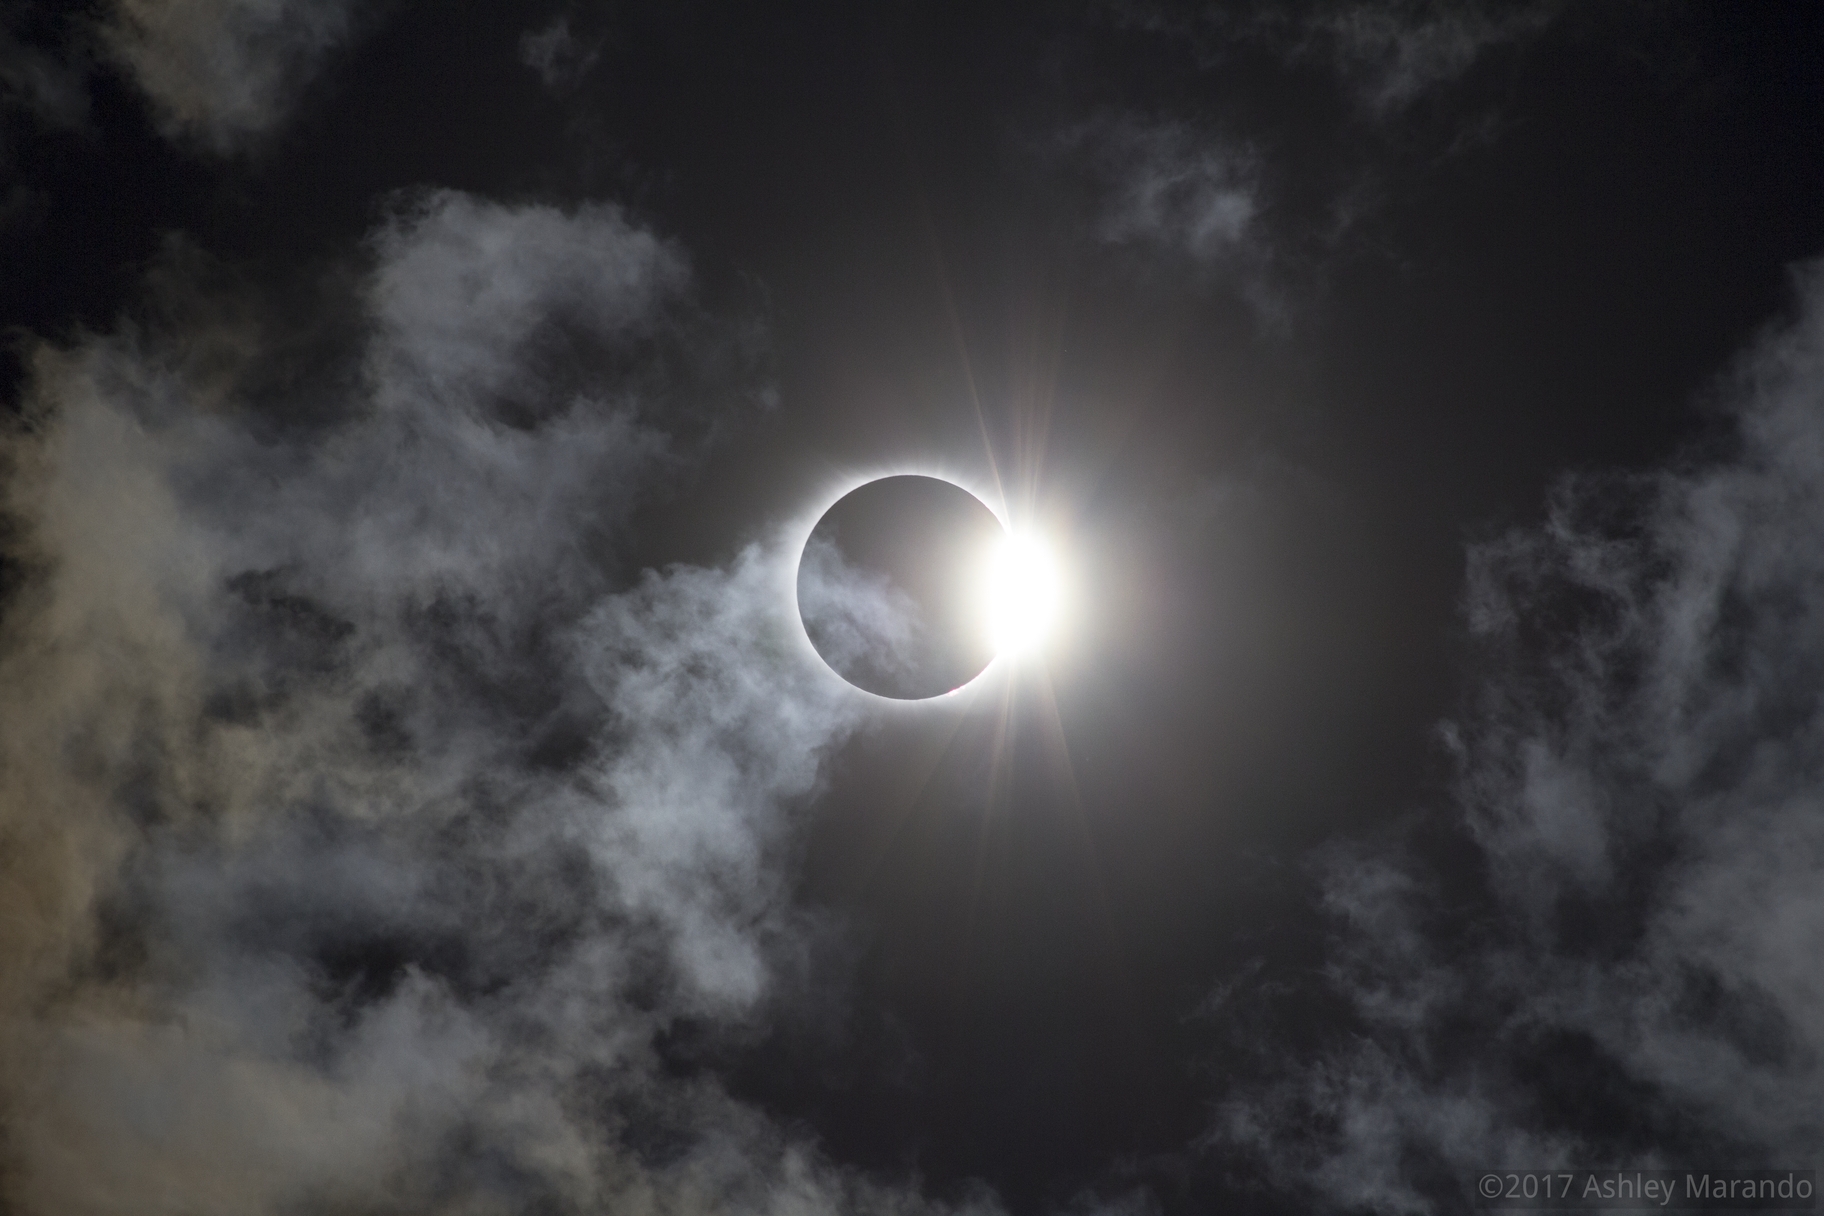 Diamond Ring in a Cloudy Sky